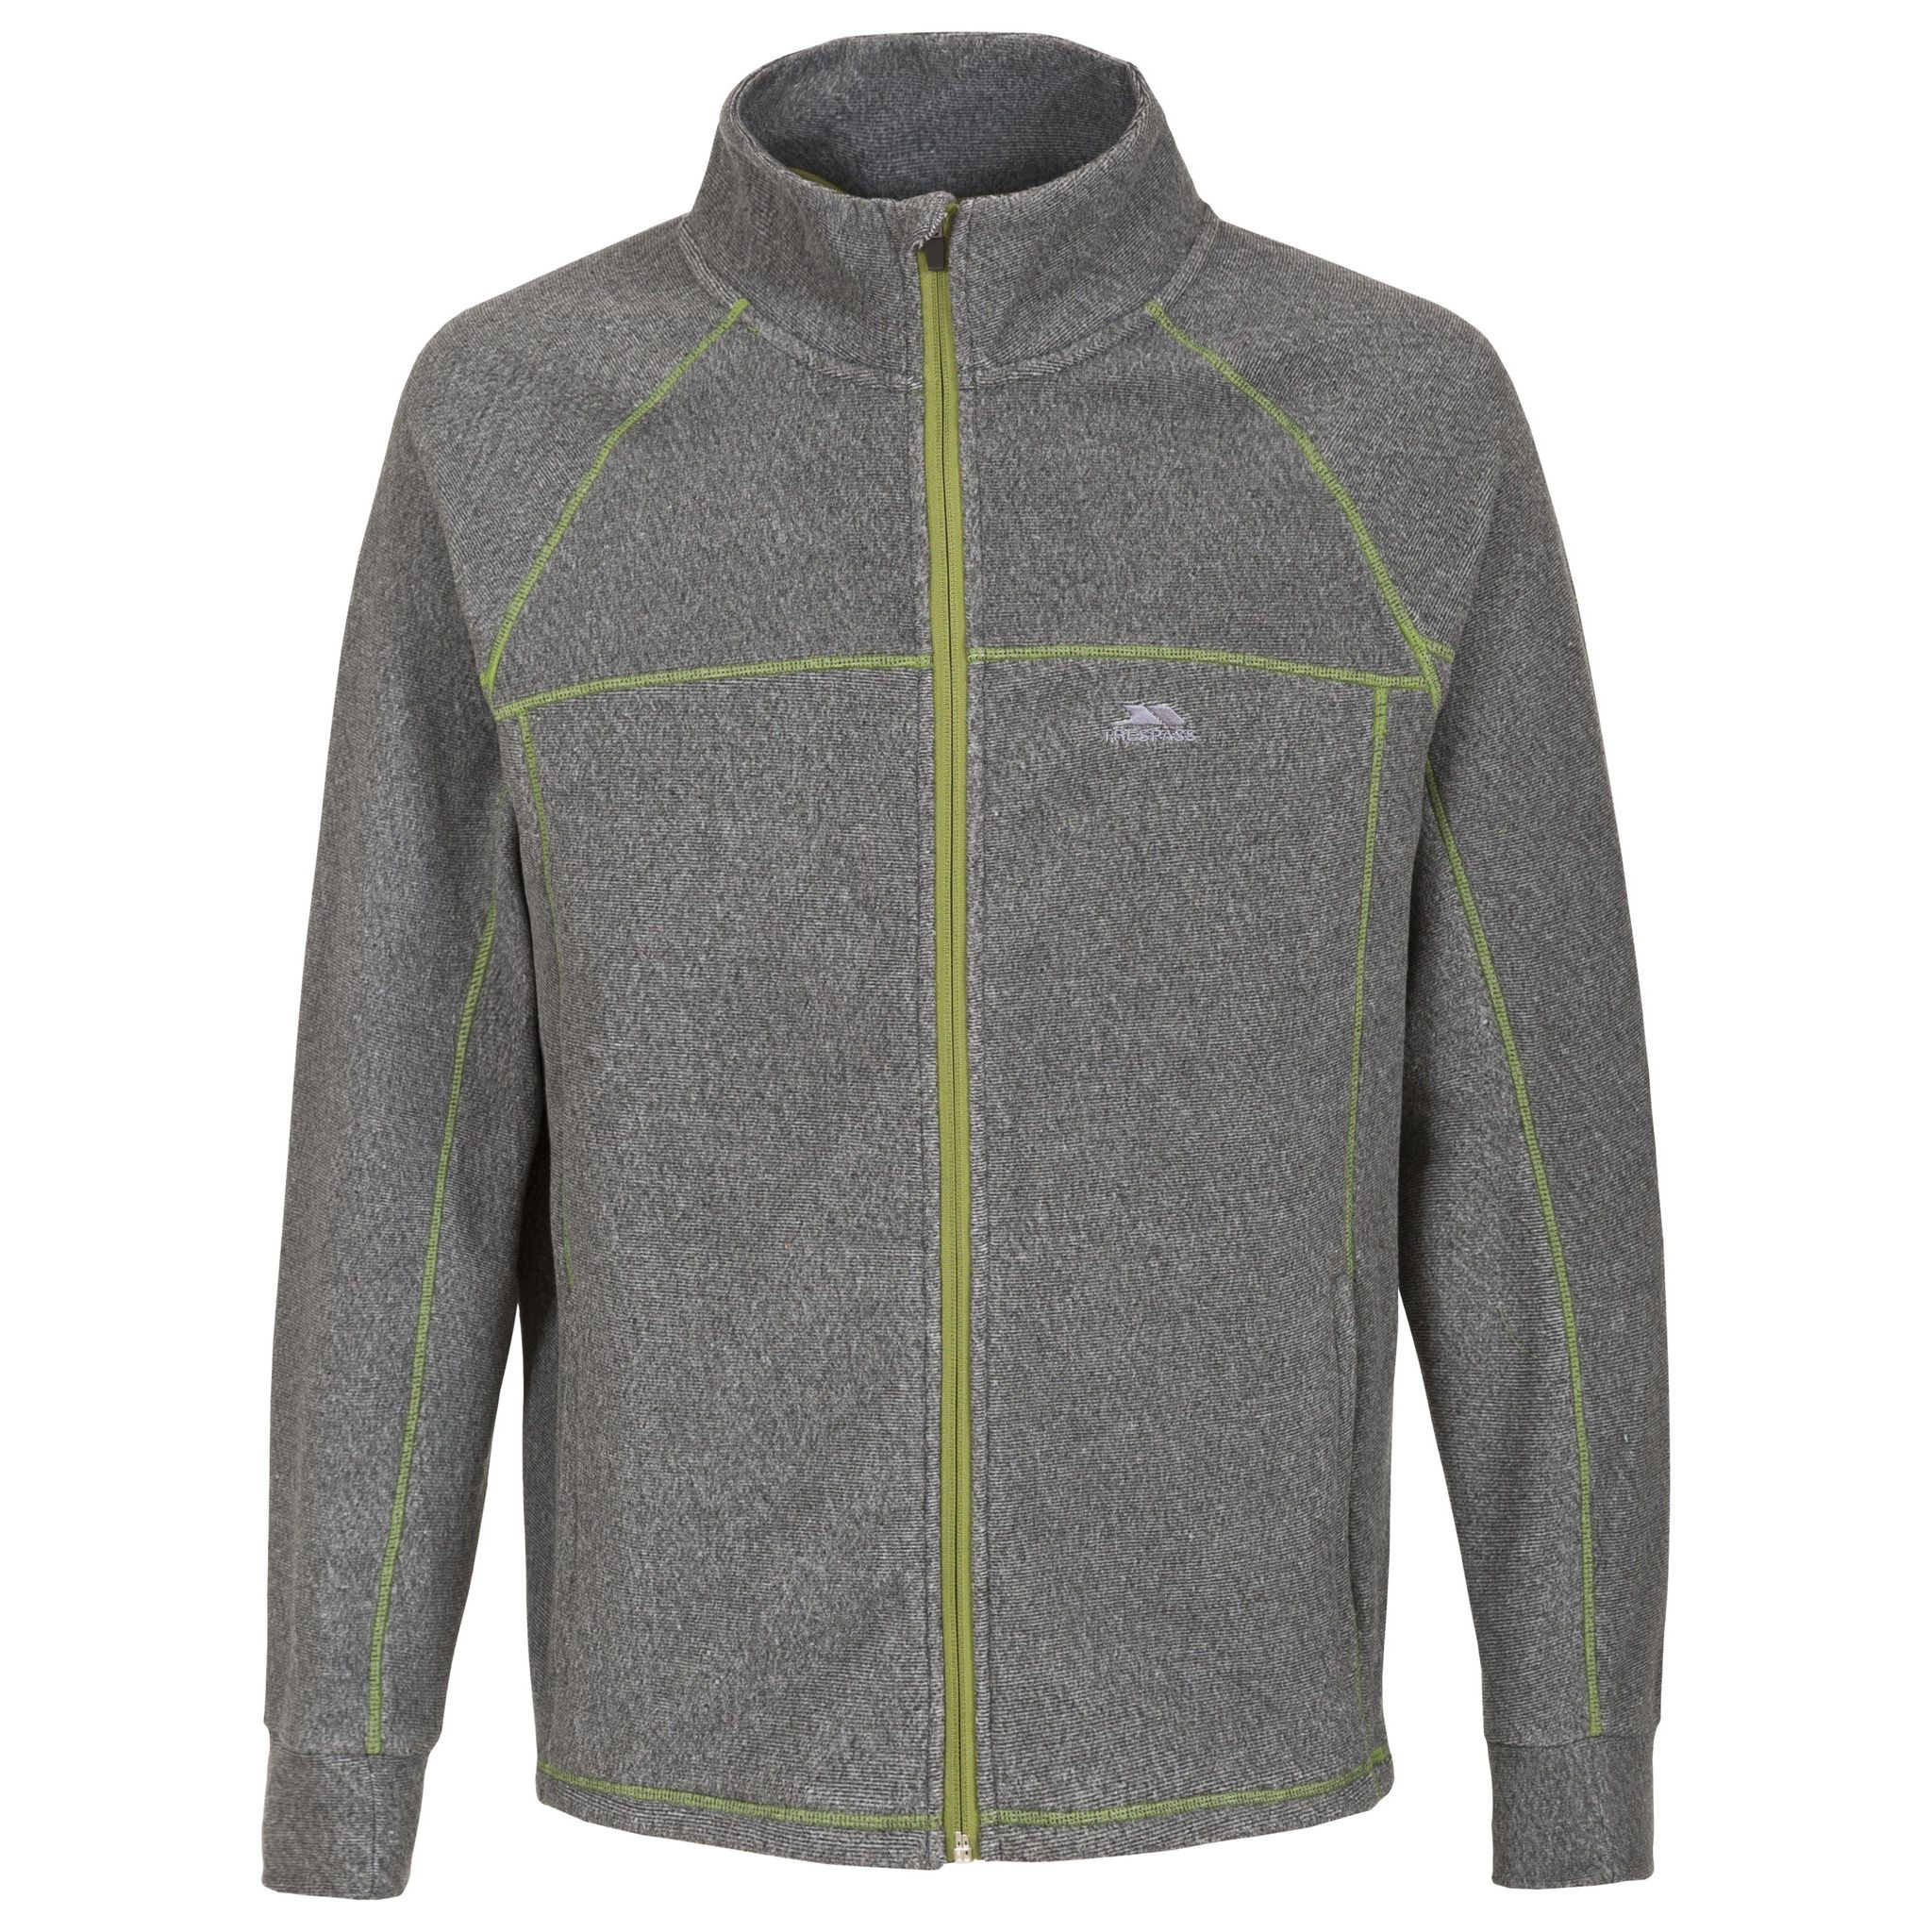 Melange striped fleece with brushed back. Contrast low profile full zip. Inner front facing. Chin guard. 2 zip pockets. Contrast cover stitch detail. 100% Polyester. Trespass Mens Chest Sizing (approx): S - 35-37in/89-94cm, M - 38-40in/96.5-101.5cm, L - 41-43in/104-109cm, XL - 44-46in/111.5-117cm, XXL - 46-48in/117-122cm, 3XL - 48-50in/122-127cm.